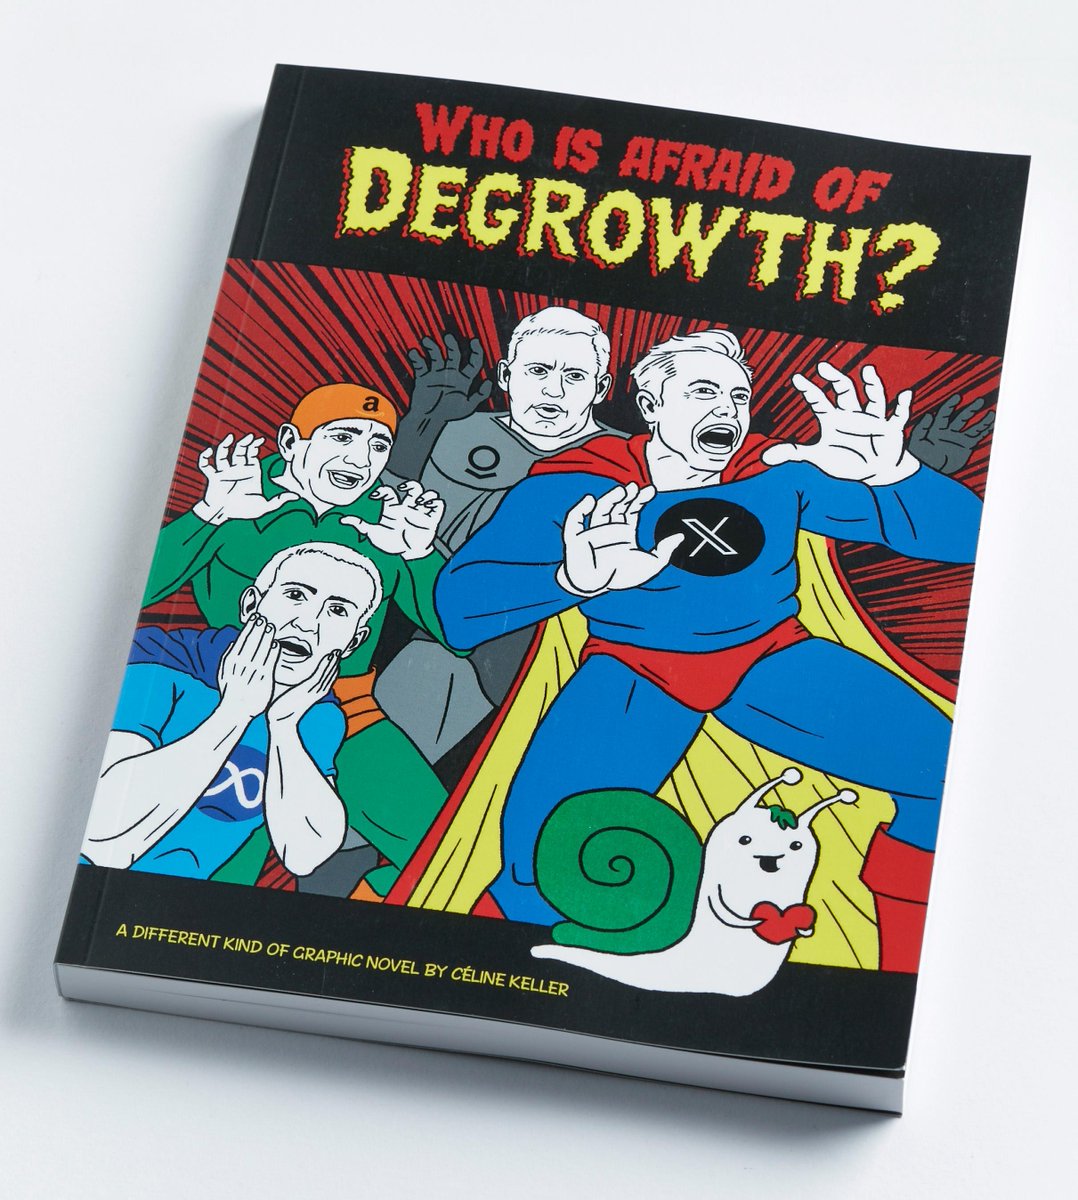 Hello friends of climate action, social justice, and a livable future for all: the crowdfunding campaign for ⚡️WHO IS AFRAID OF DEGROWTH?⚡️(a graphic novel about the misunderstandings of degrowth) is online! Please check it out and help me spread it: en.goteo.org/project/who-is…